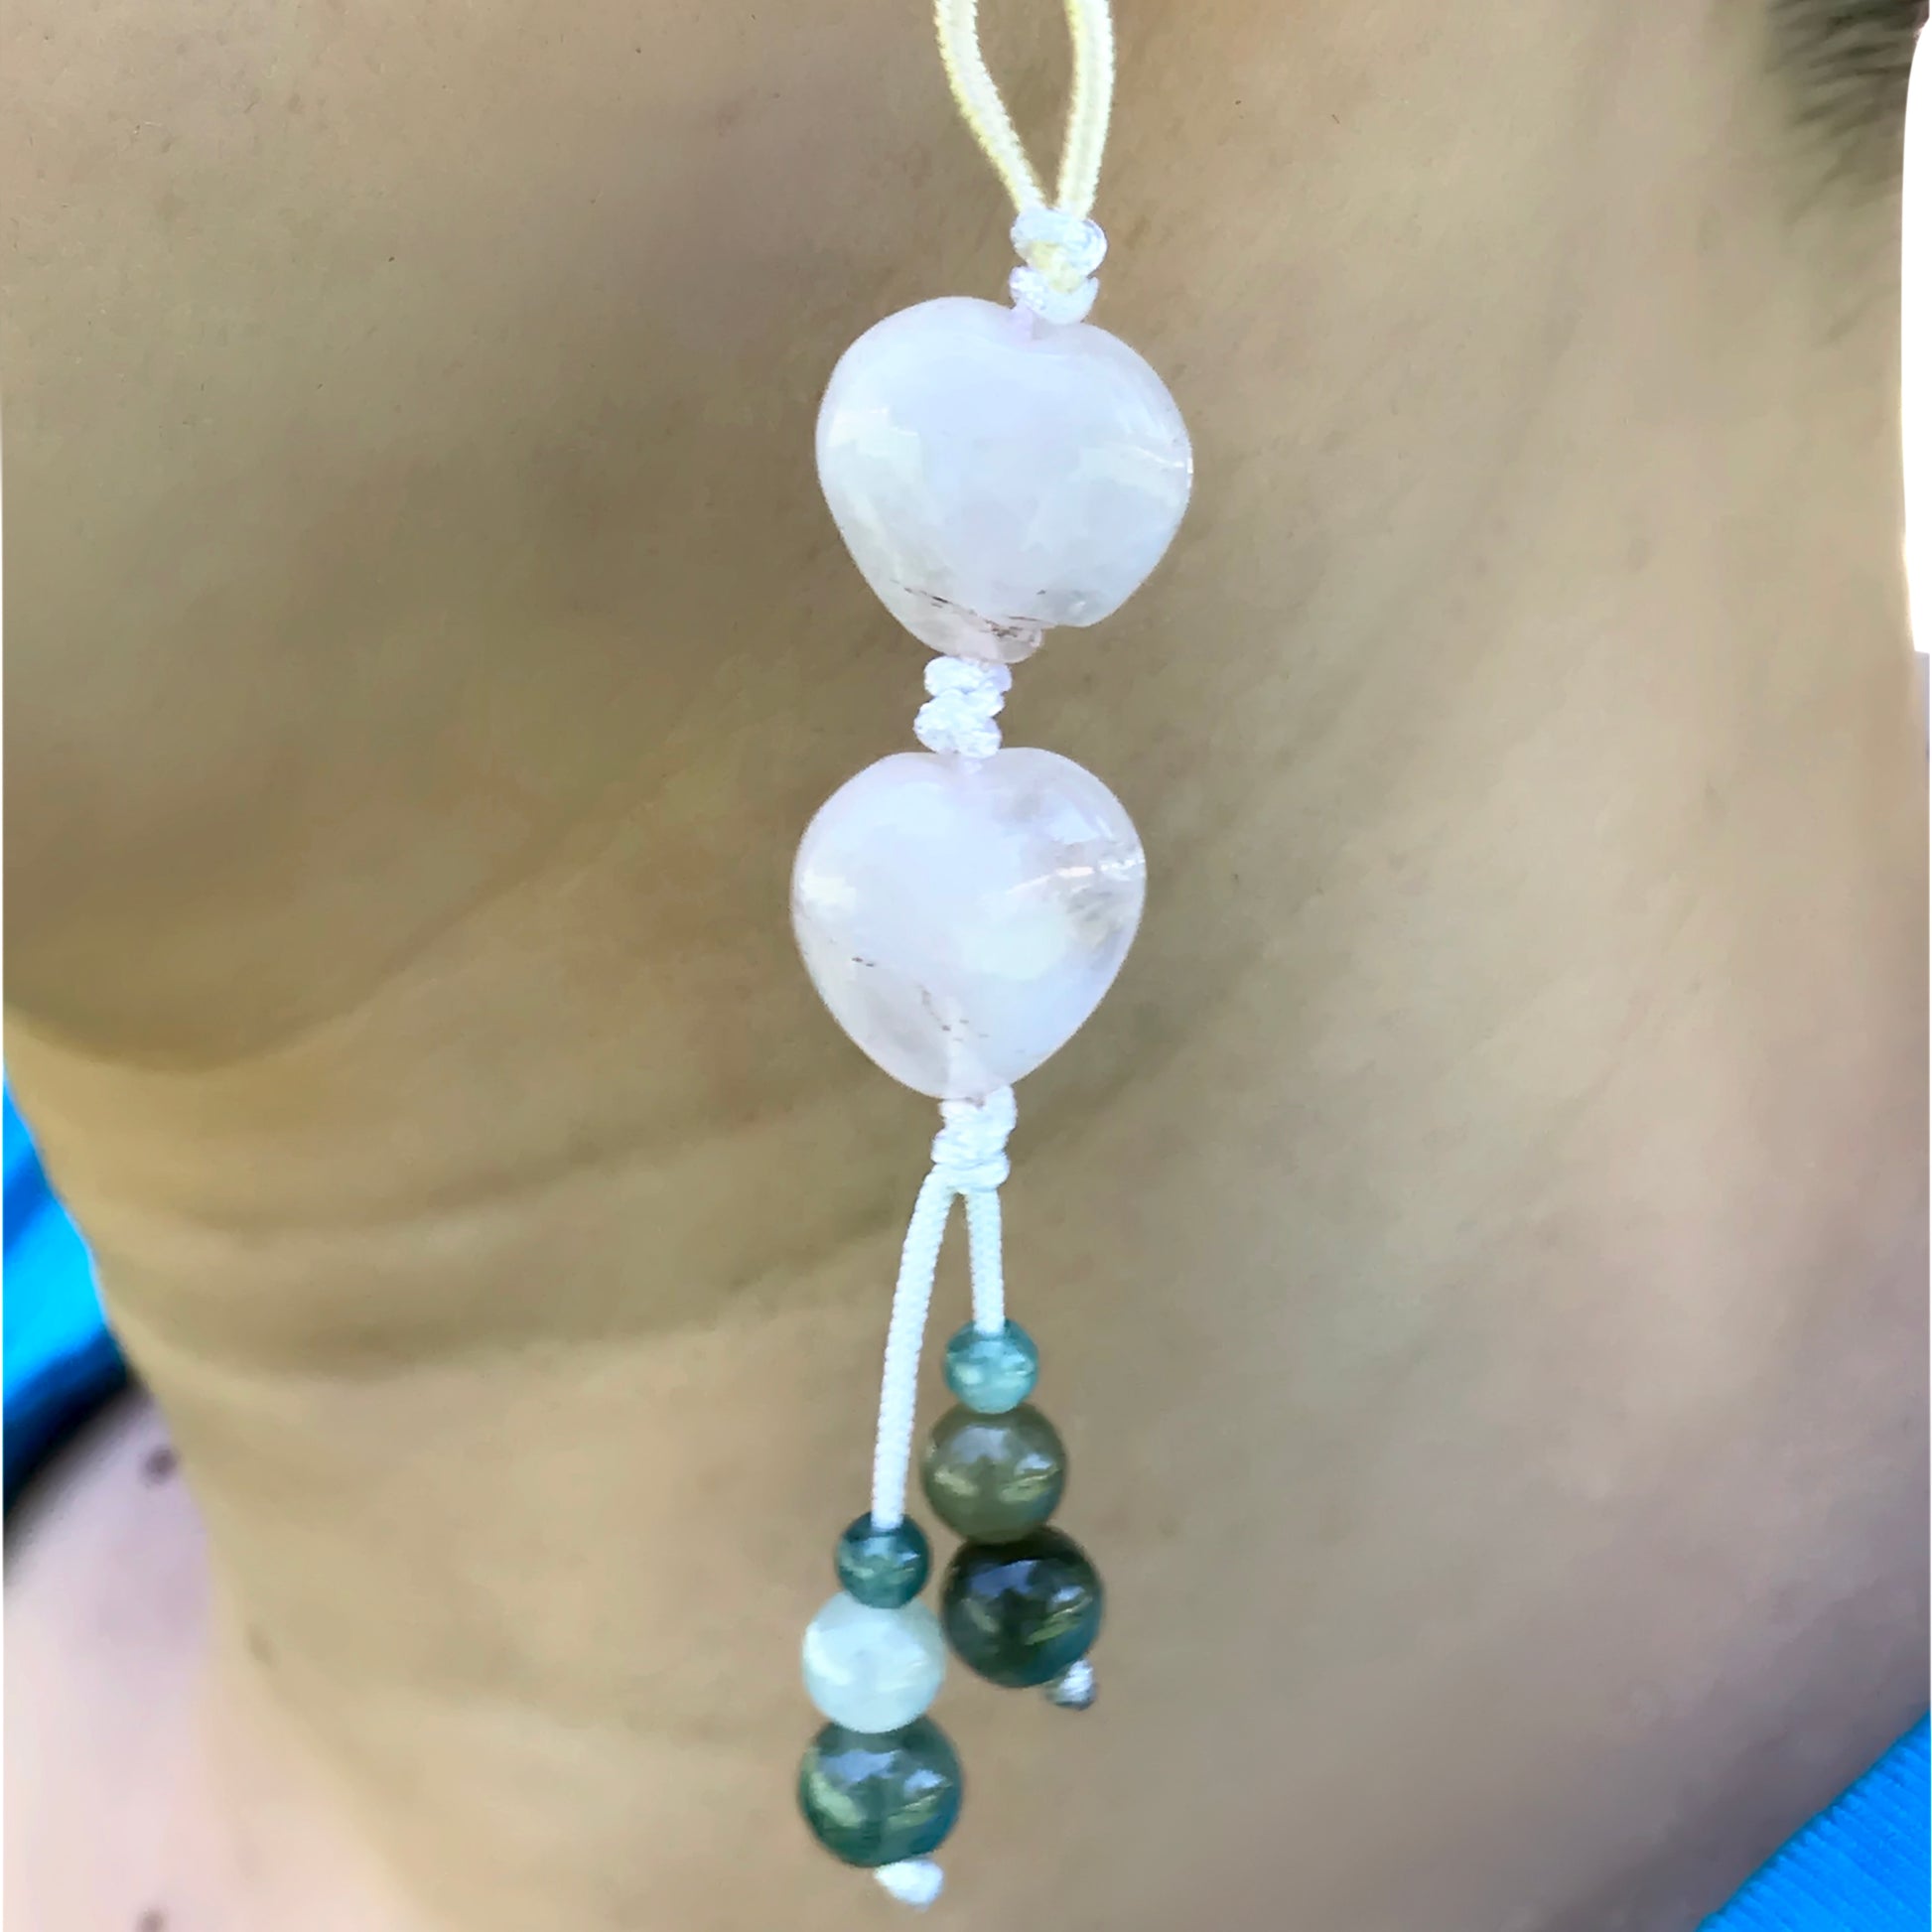 Show Your Love with Rose Quartz Double Heart Earrings made with White Cord